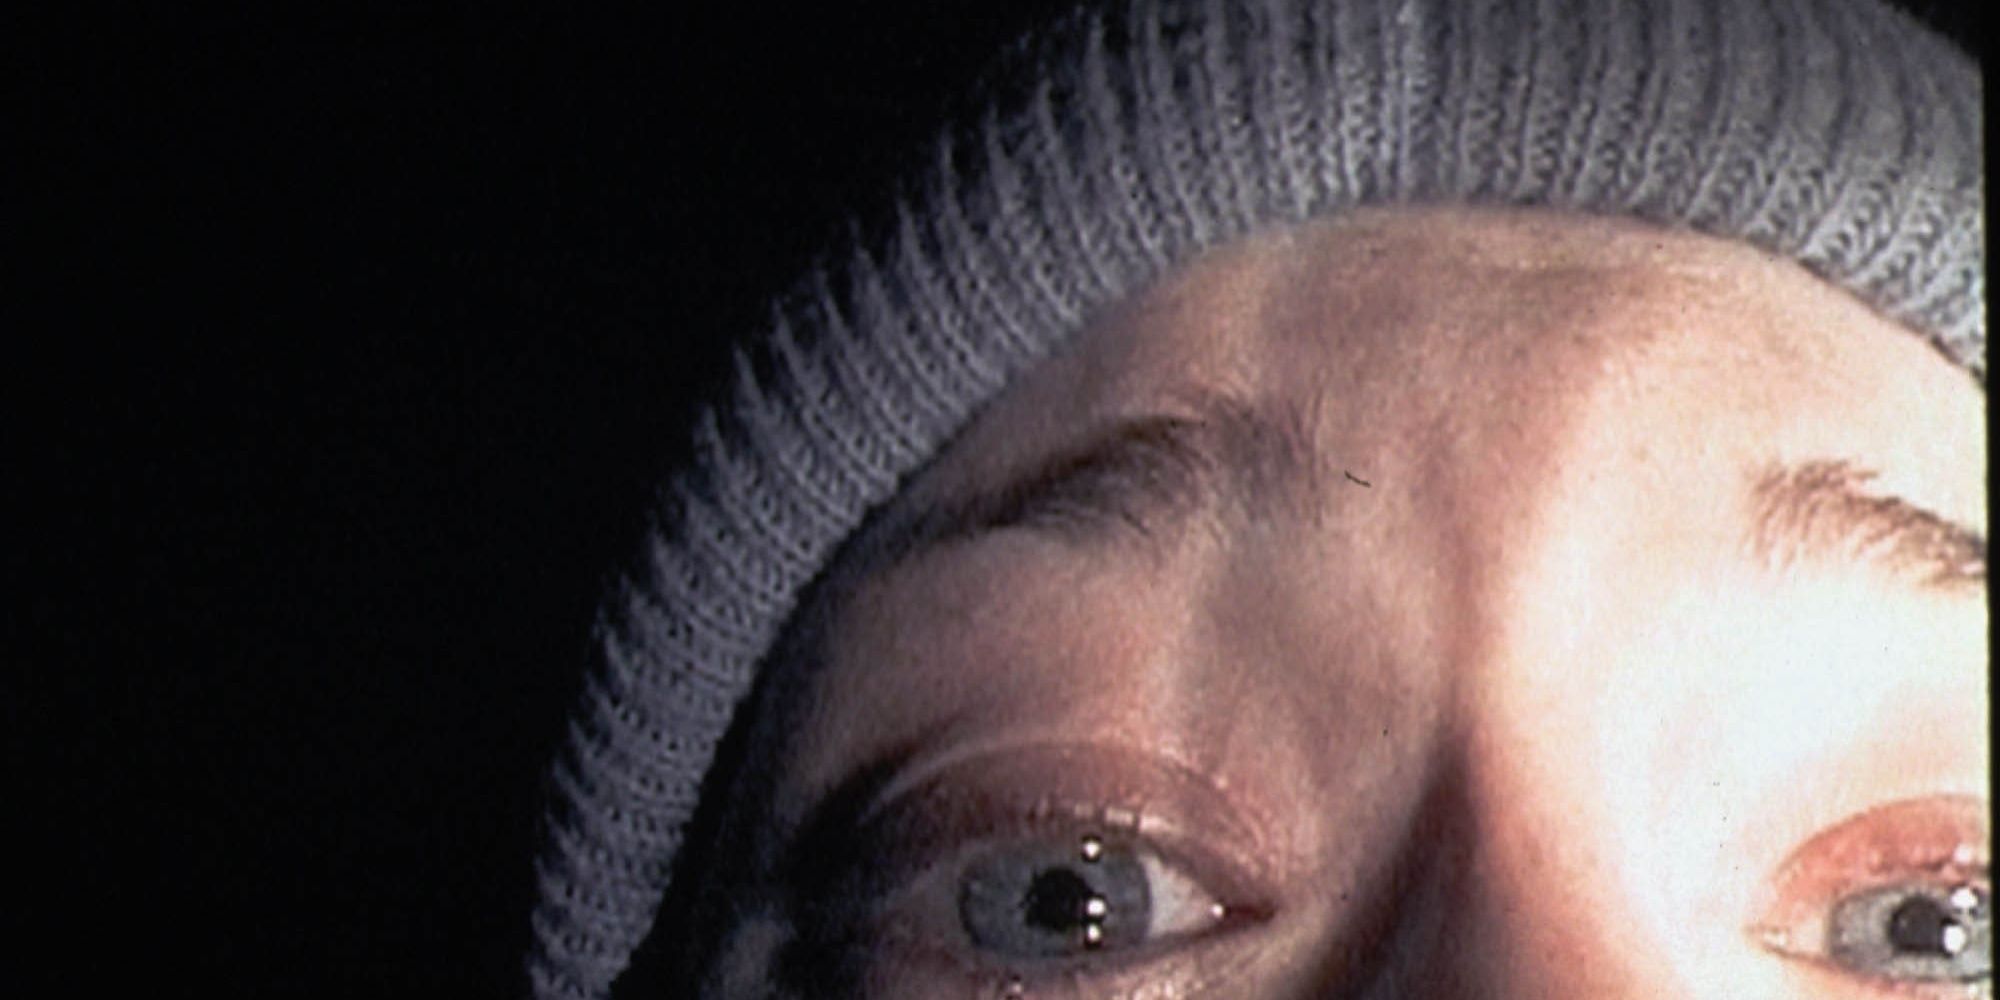 Heather Donahue as Heather in The Blair Witch Project The Blair Witch Project